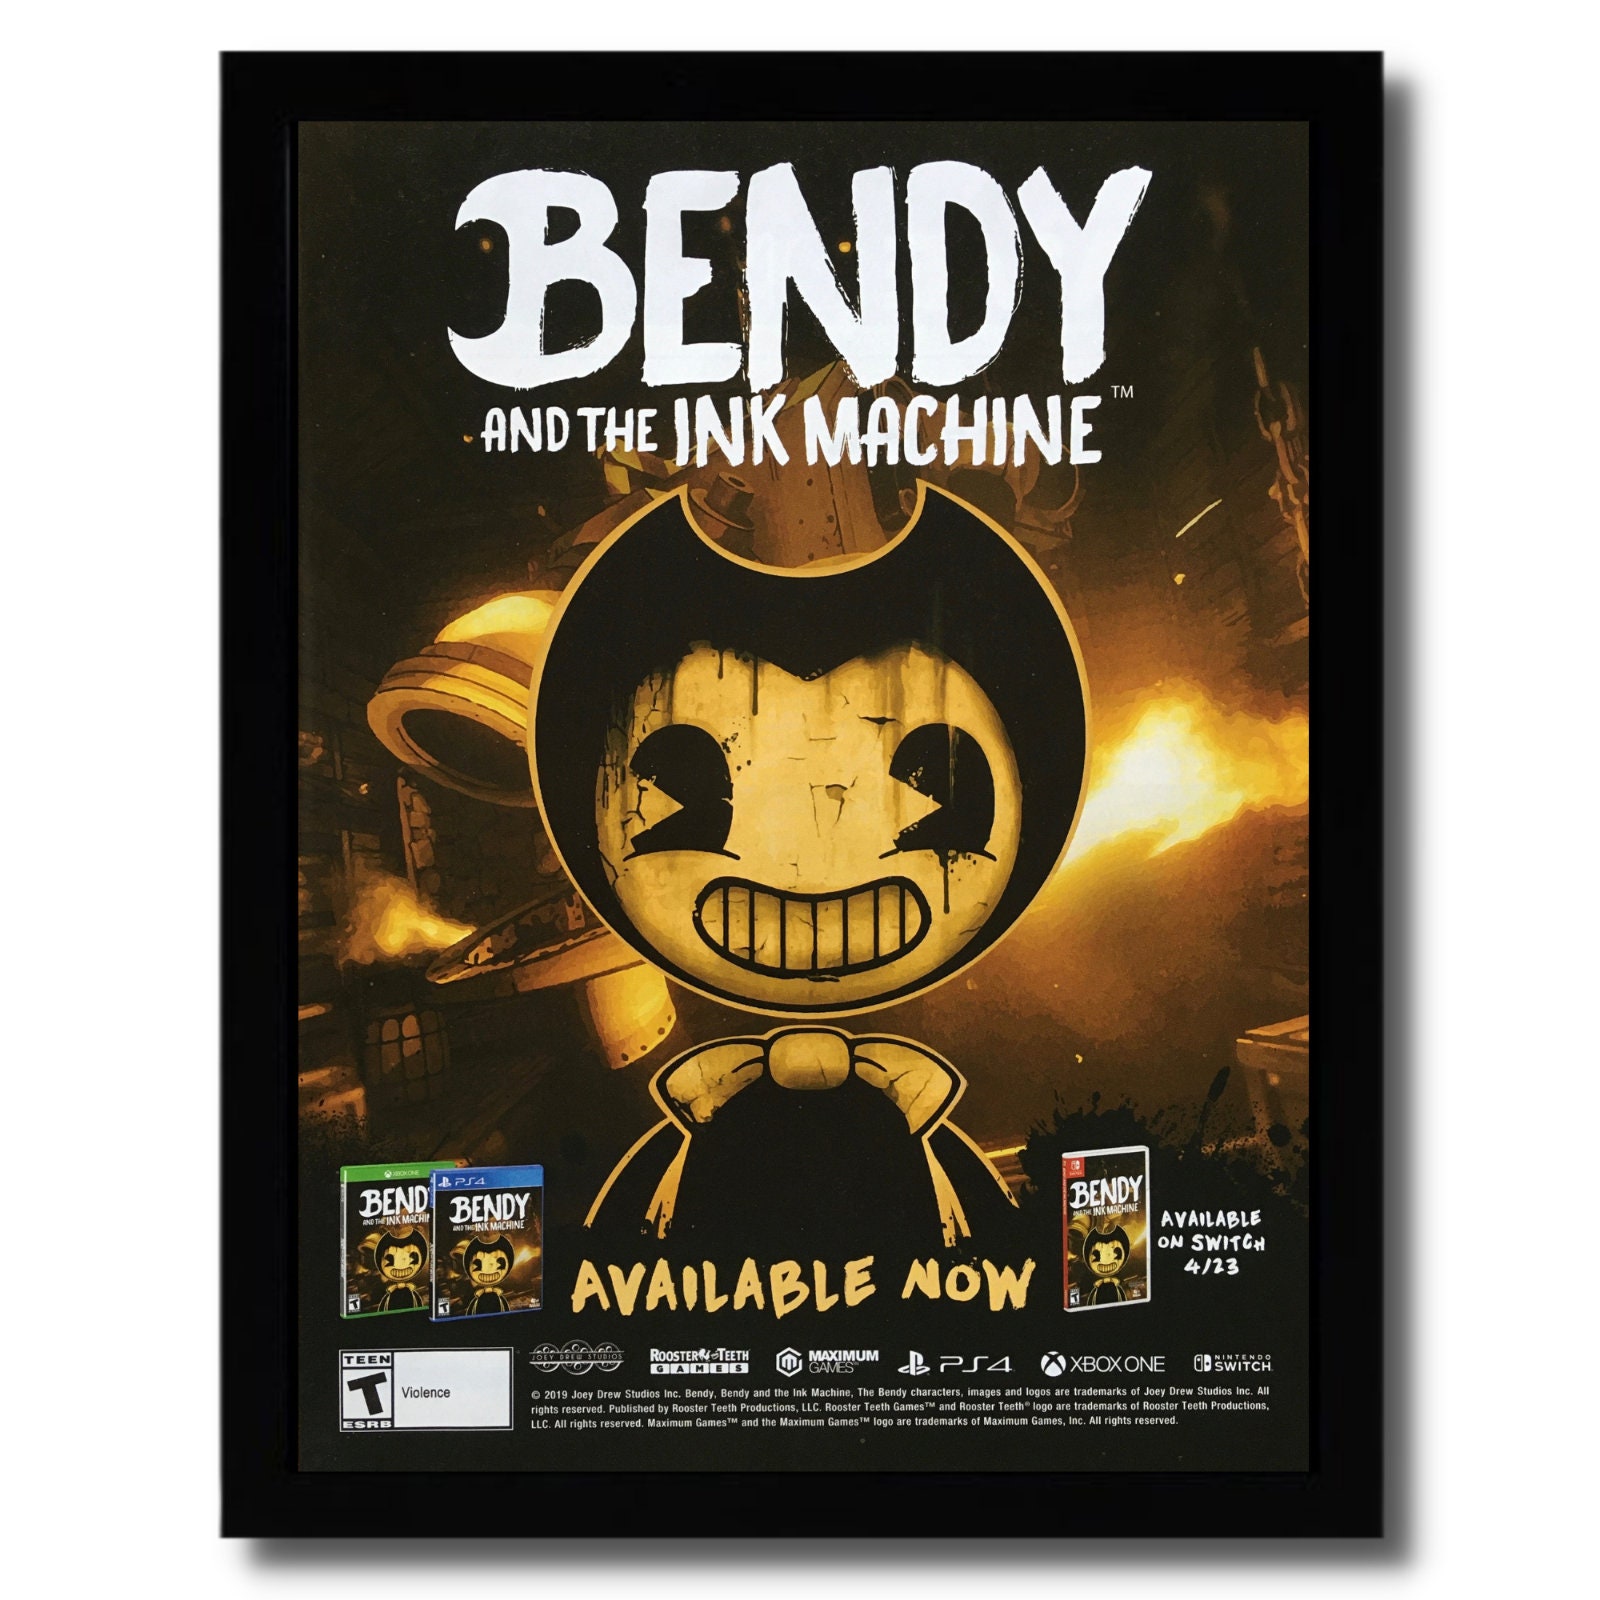 2019 Bendy and the Ink Machine Framed Print Ad/Poster PS4 Xbox - Etsy 日本